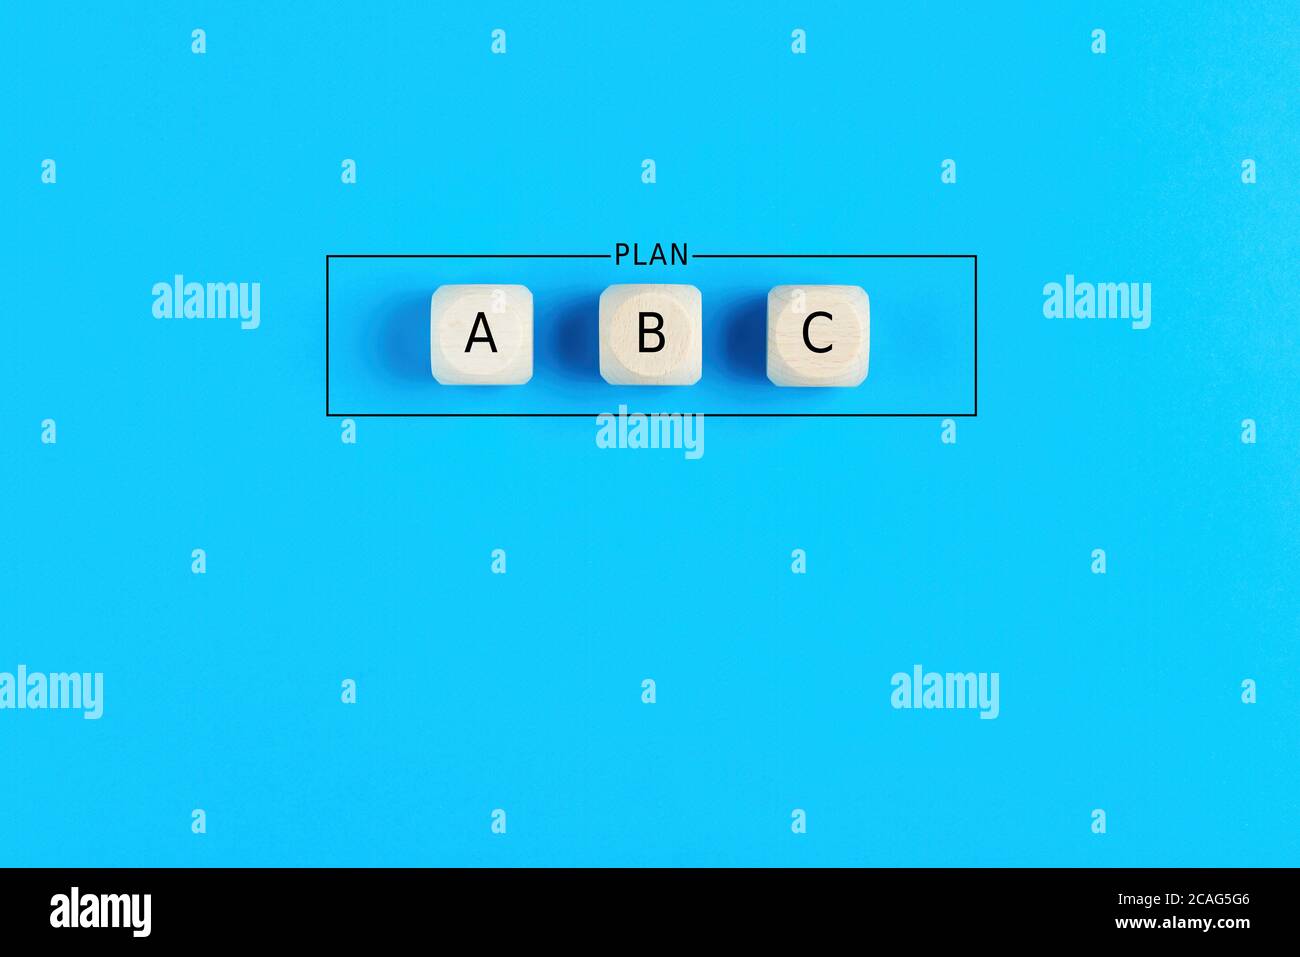 Plan a, b and c on wooden cubes on blue background. Choosing a business strategy plan out of three options. Stock Photo